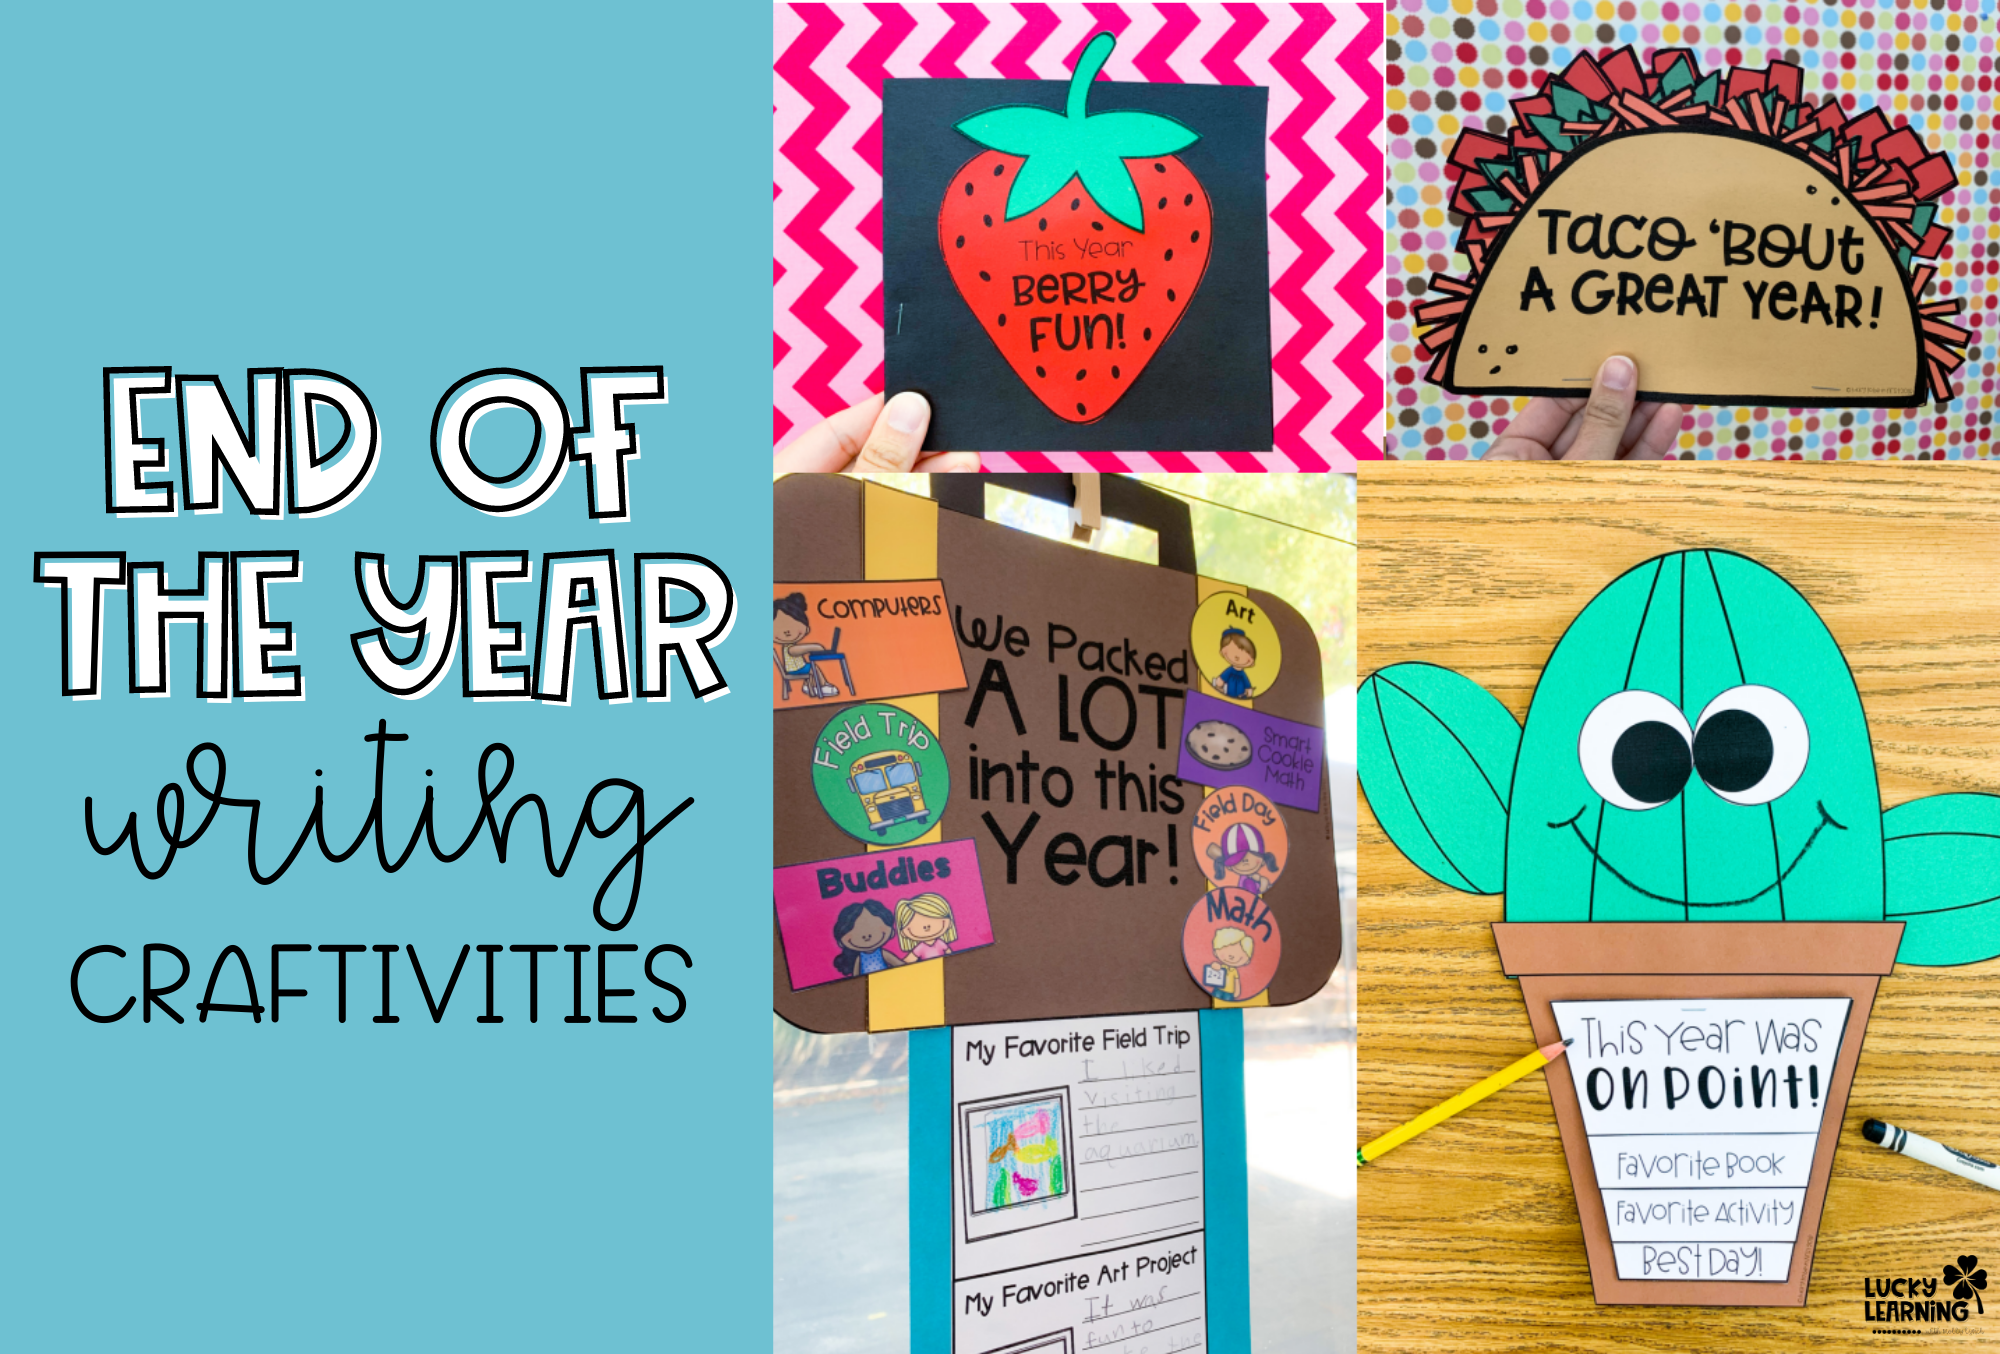 end of the year writing craftivities with cactus theme | Lucky Learning with Molly Lynch